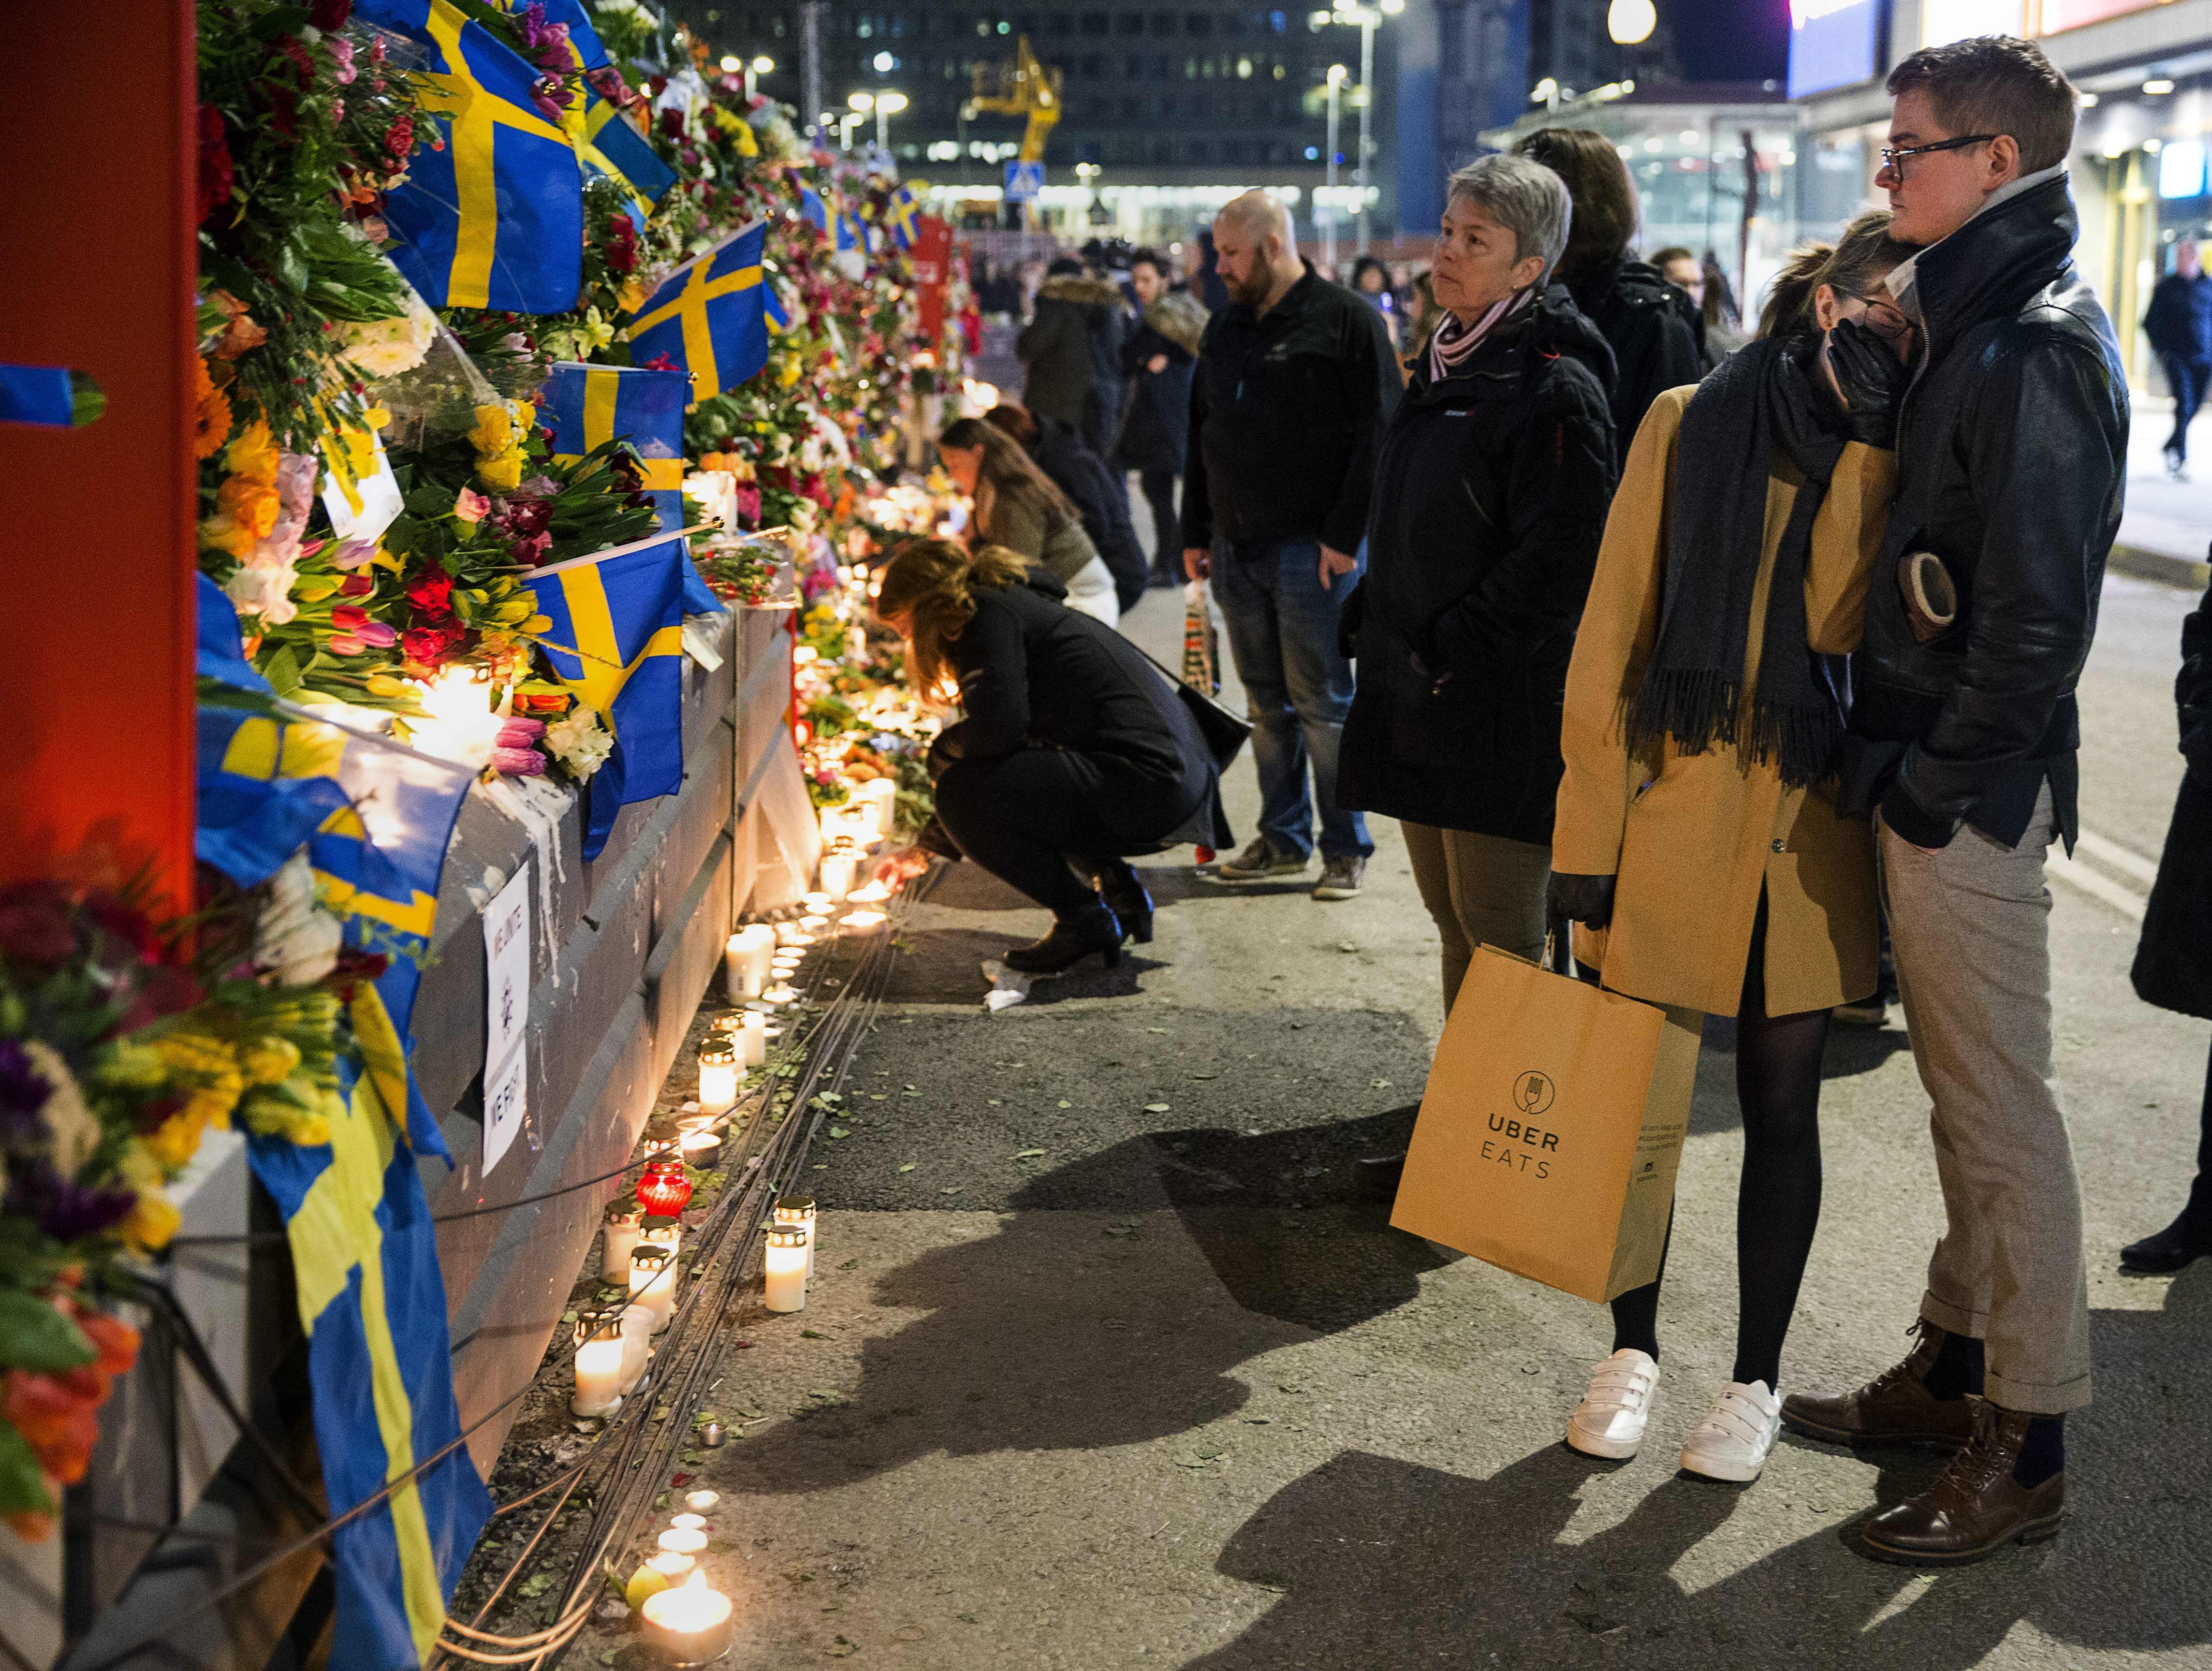 Mourners pay their respects to the victims of a April 7 terrorist attack in Stockholm, Sweden. (Photo: Aftonbladet/ZUMA Press/Newscom)